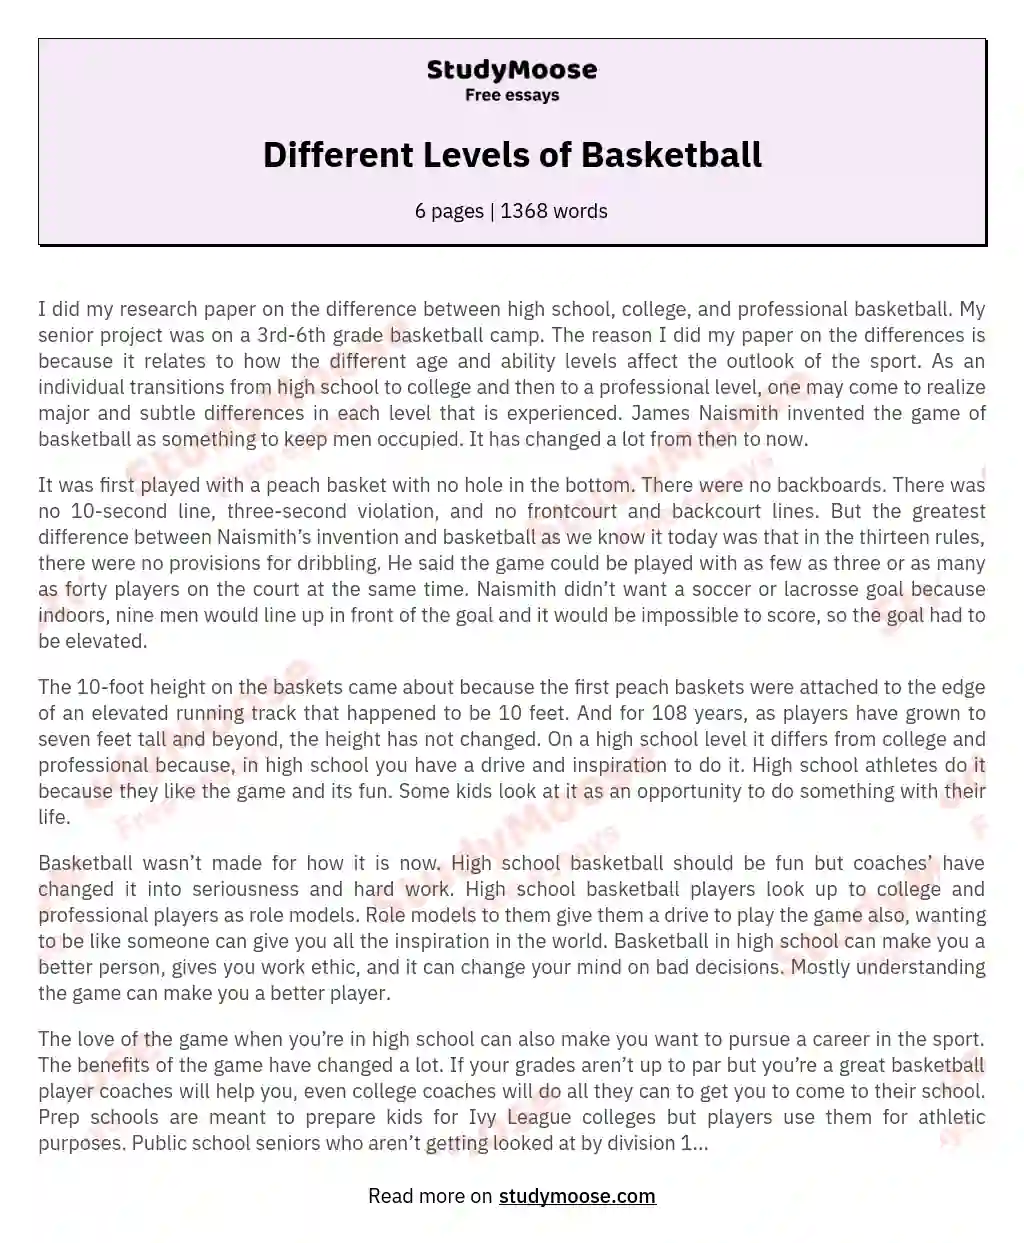 Different Levels of Basketball